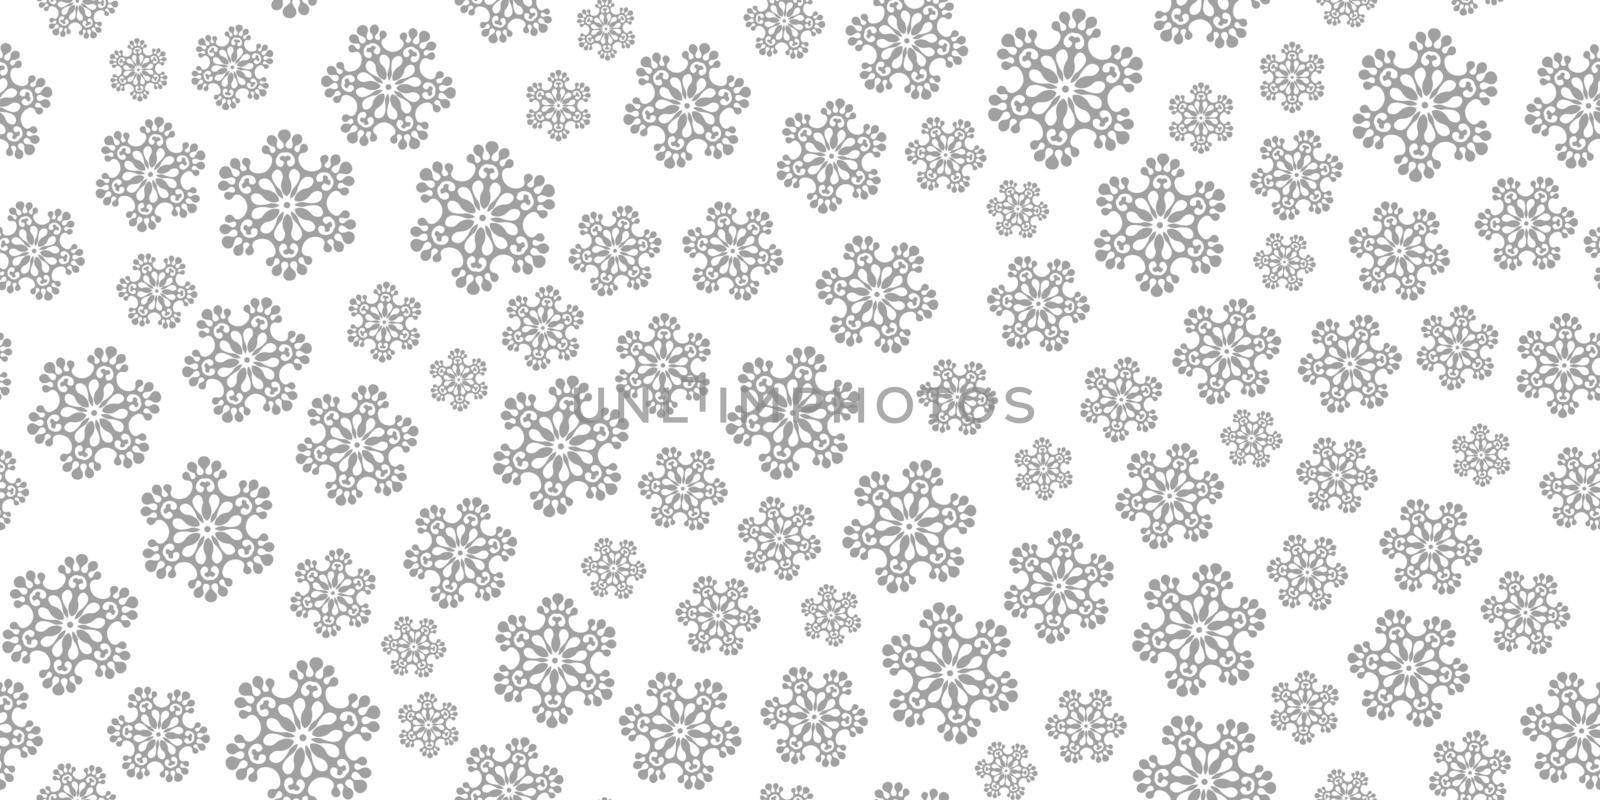 Winter seamless pattern with grey snowflakes on white background. Vector illustration for fabric, textile wallpaper, posters, gift wrapping paper. Christmas vector illustration. Falling snow.